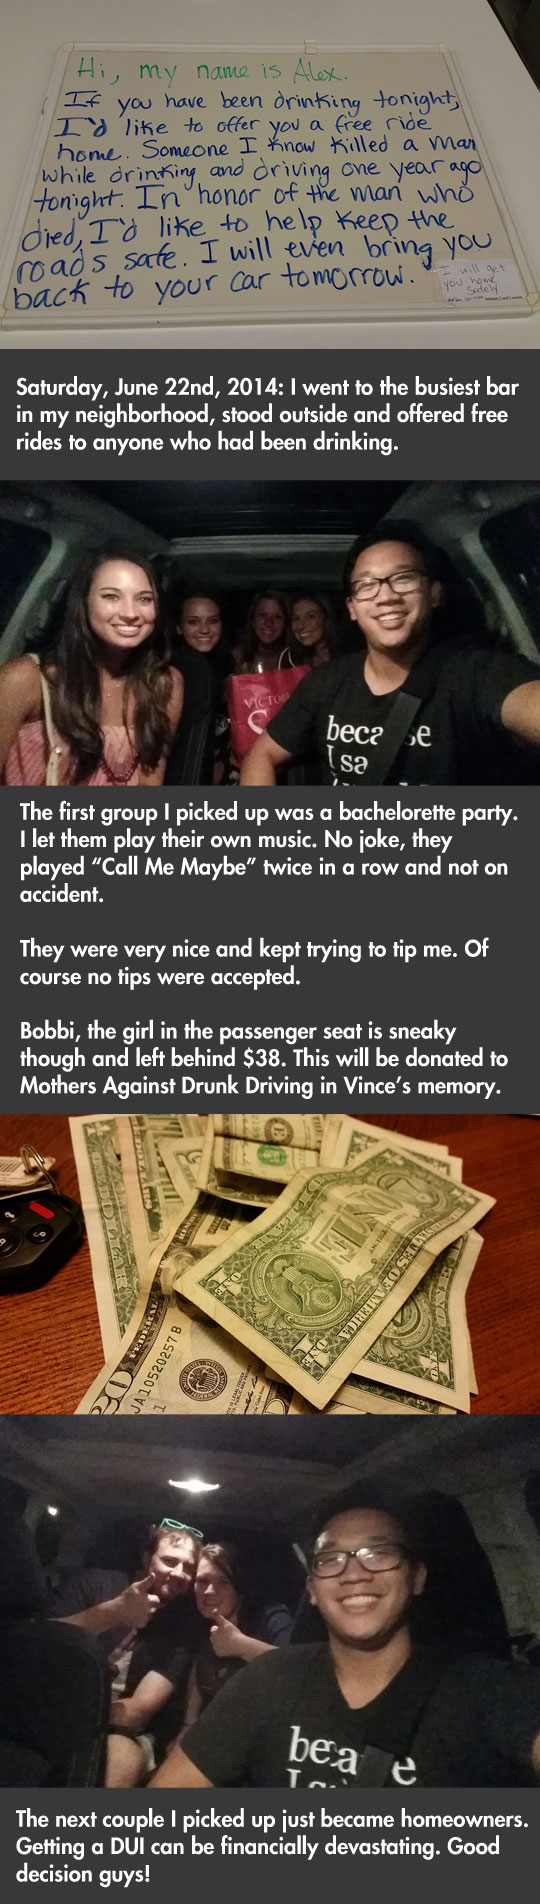 Man Offers To Drive Drunk People Home For Free